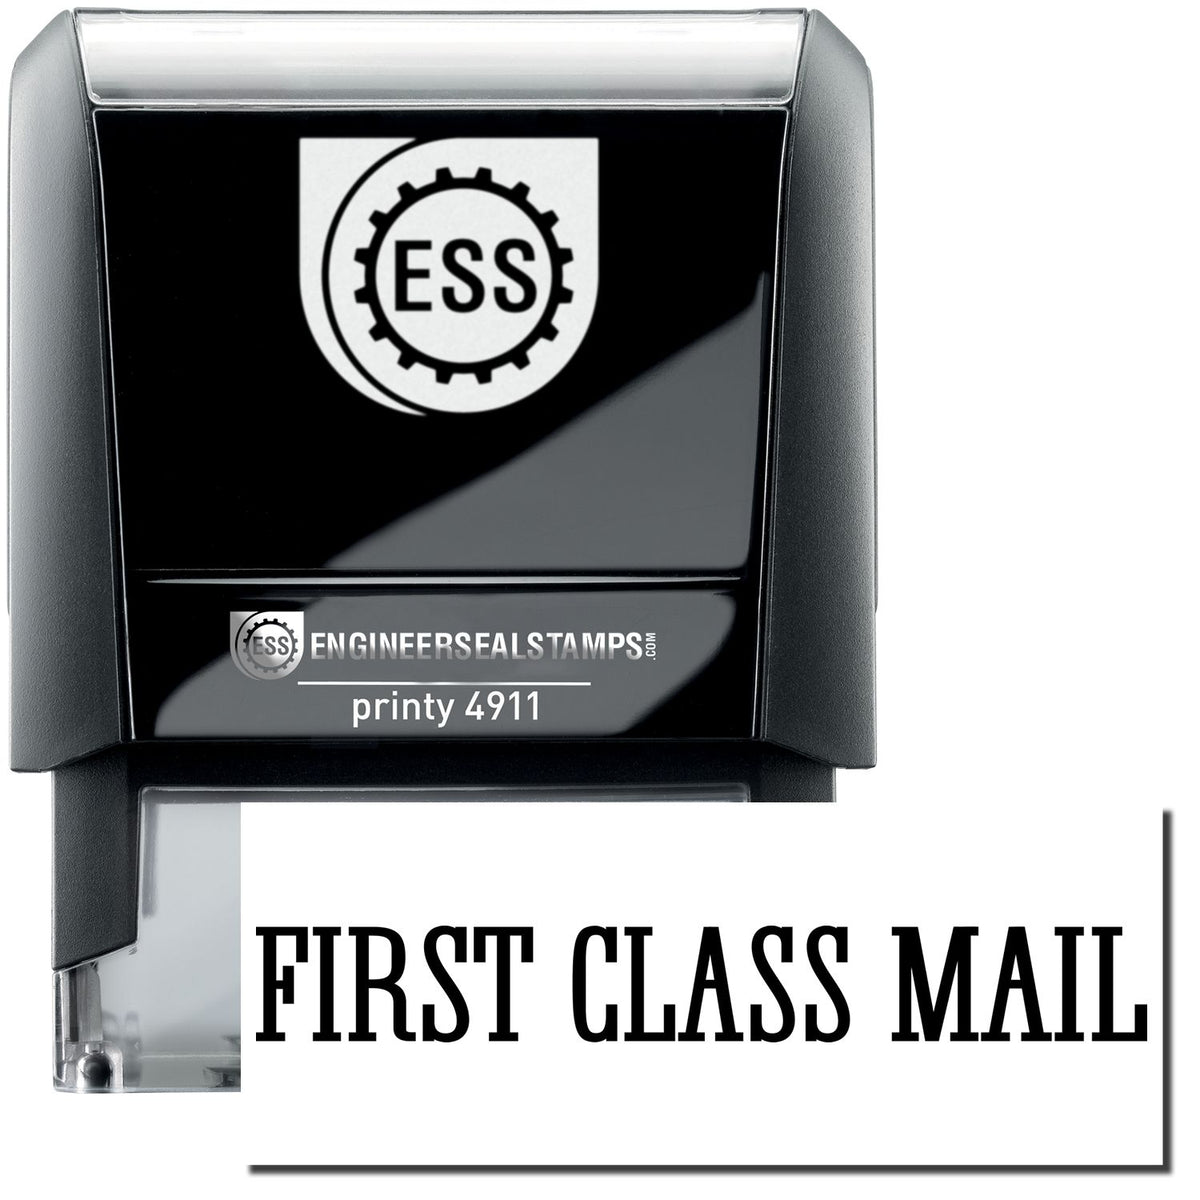 A self-inking stamp with a stamped image showing how the text &quot;FIRST CLASS MAIL&quot; in a times font is displayed after stamping.